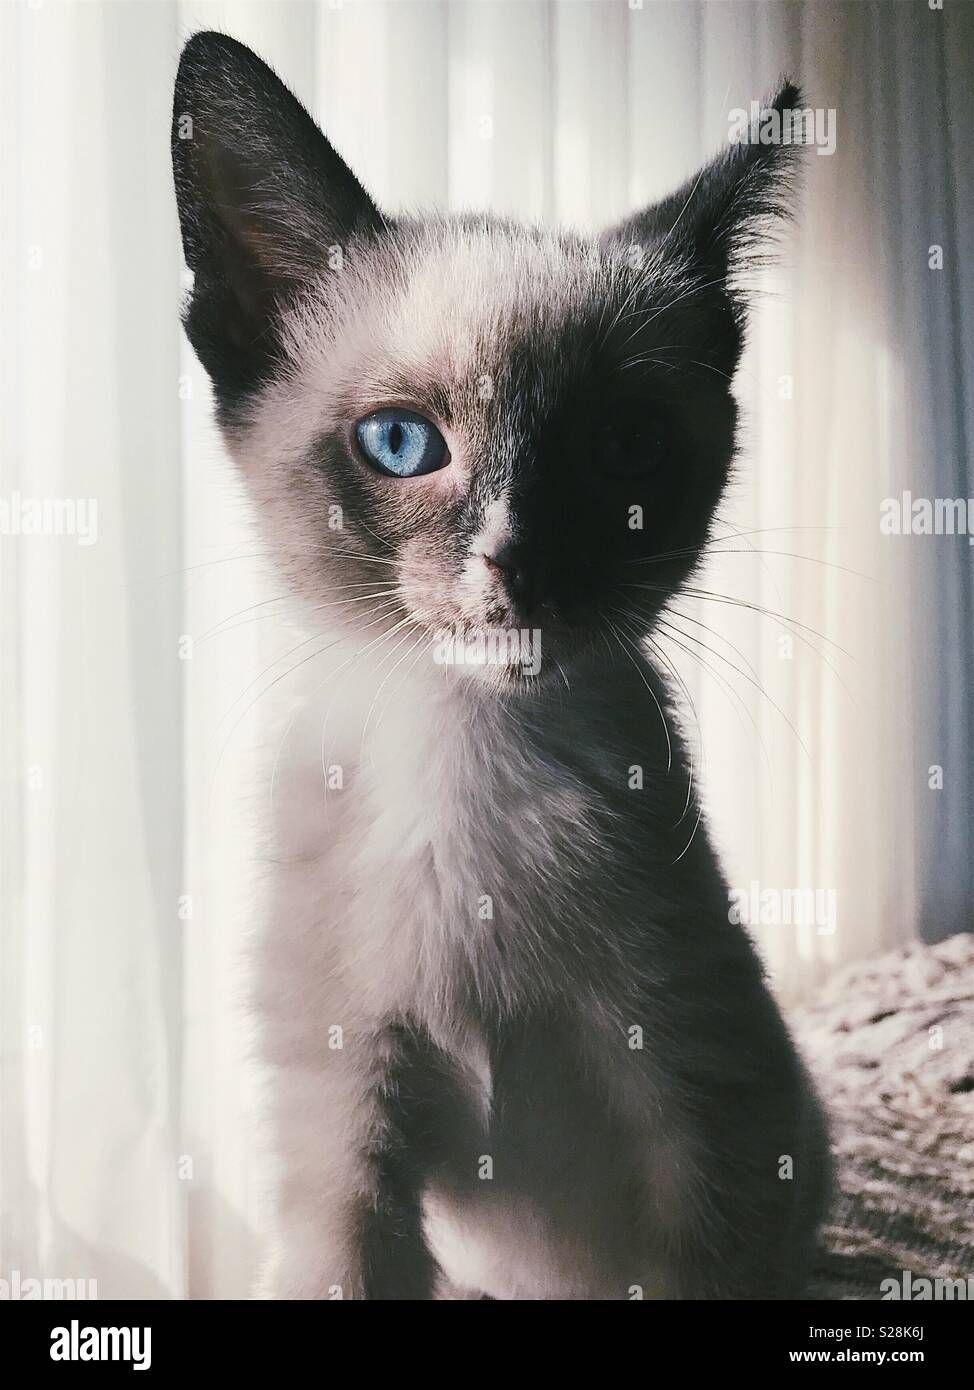 One dramatic bright blue cat eye staring from a black and white kitten. Stock Photo